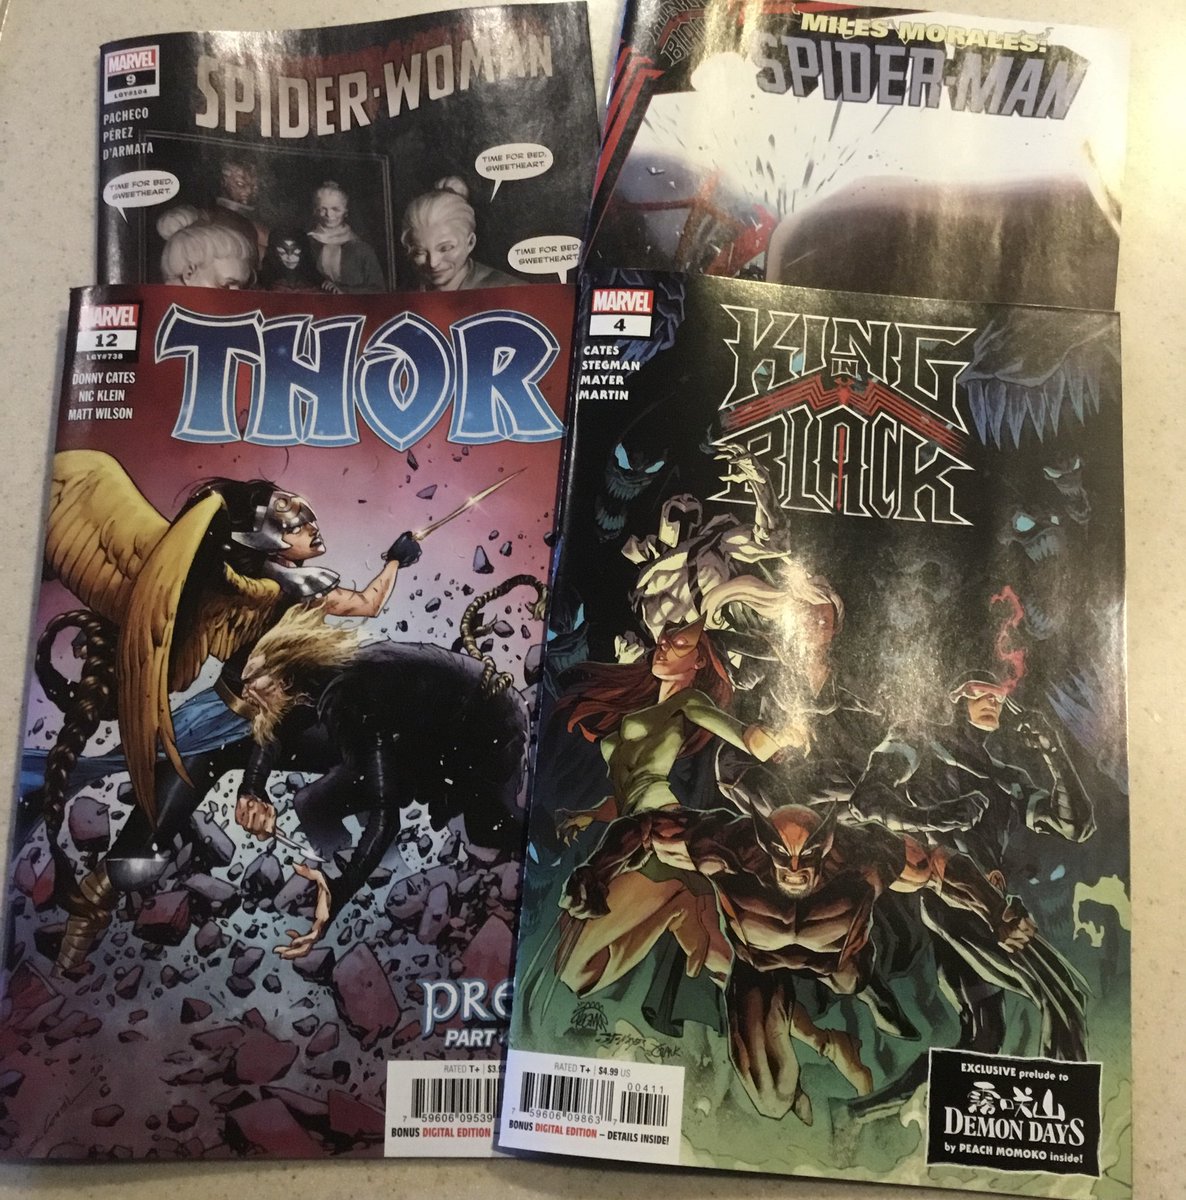 Are you a @marvel fan?  It doesn’t get better than this #newcomicbookday Donny Cates is at the top of his game.  Thor #12 & King in Black #4 are both 10/10.  Run to your LCS Wednesday.  Tell em ole Lar sent you. https://t.co/tlUFneLJb5